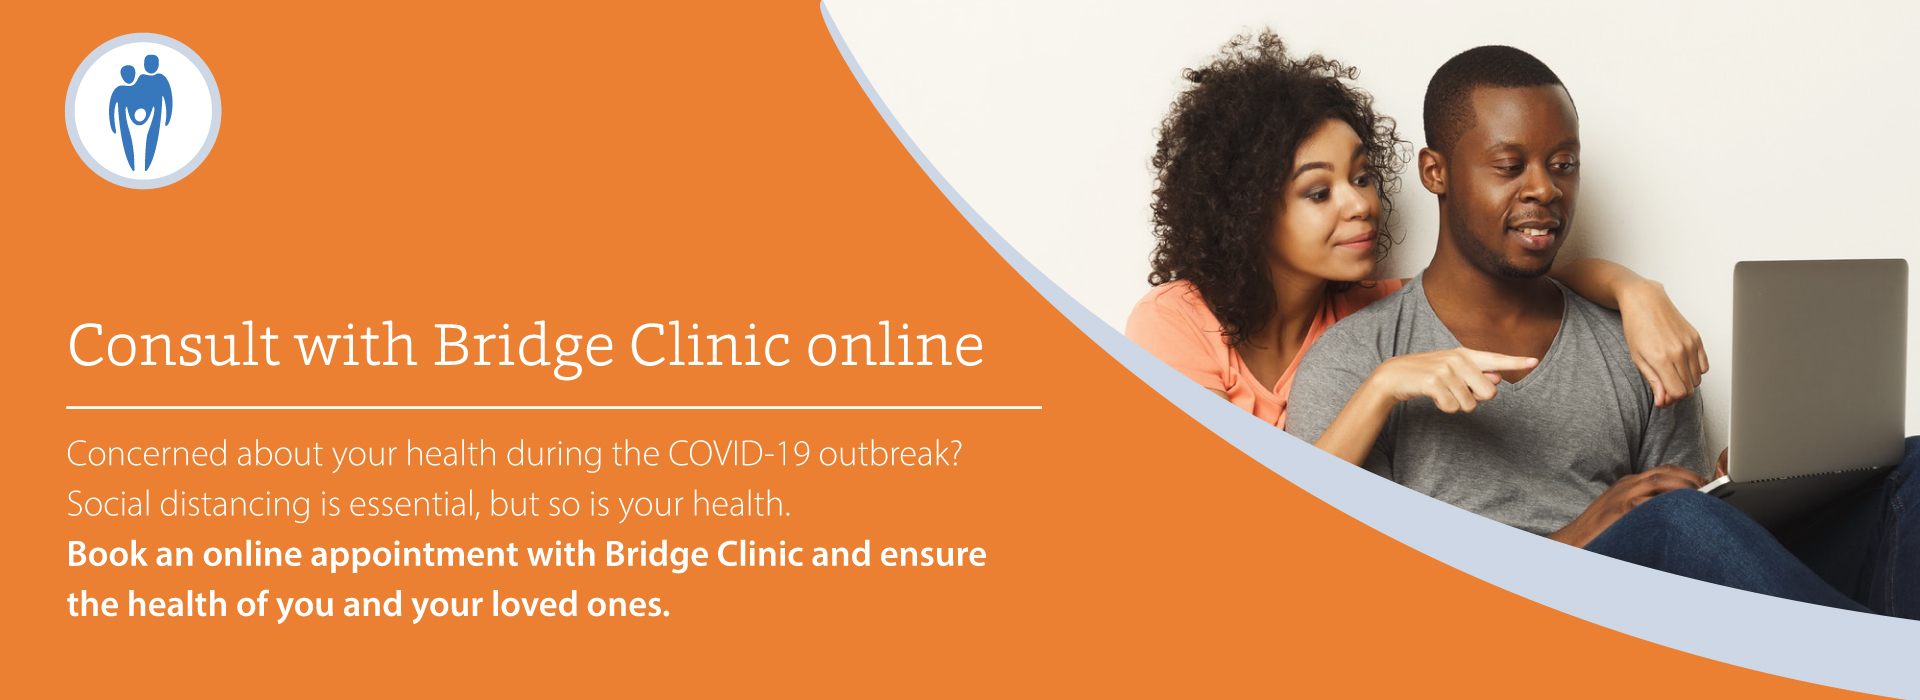 Understanding COVID-19 Terms: Social Distancing, Quarantine and Isolation